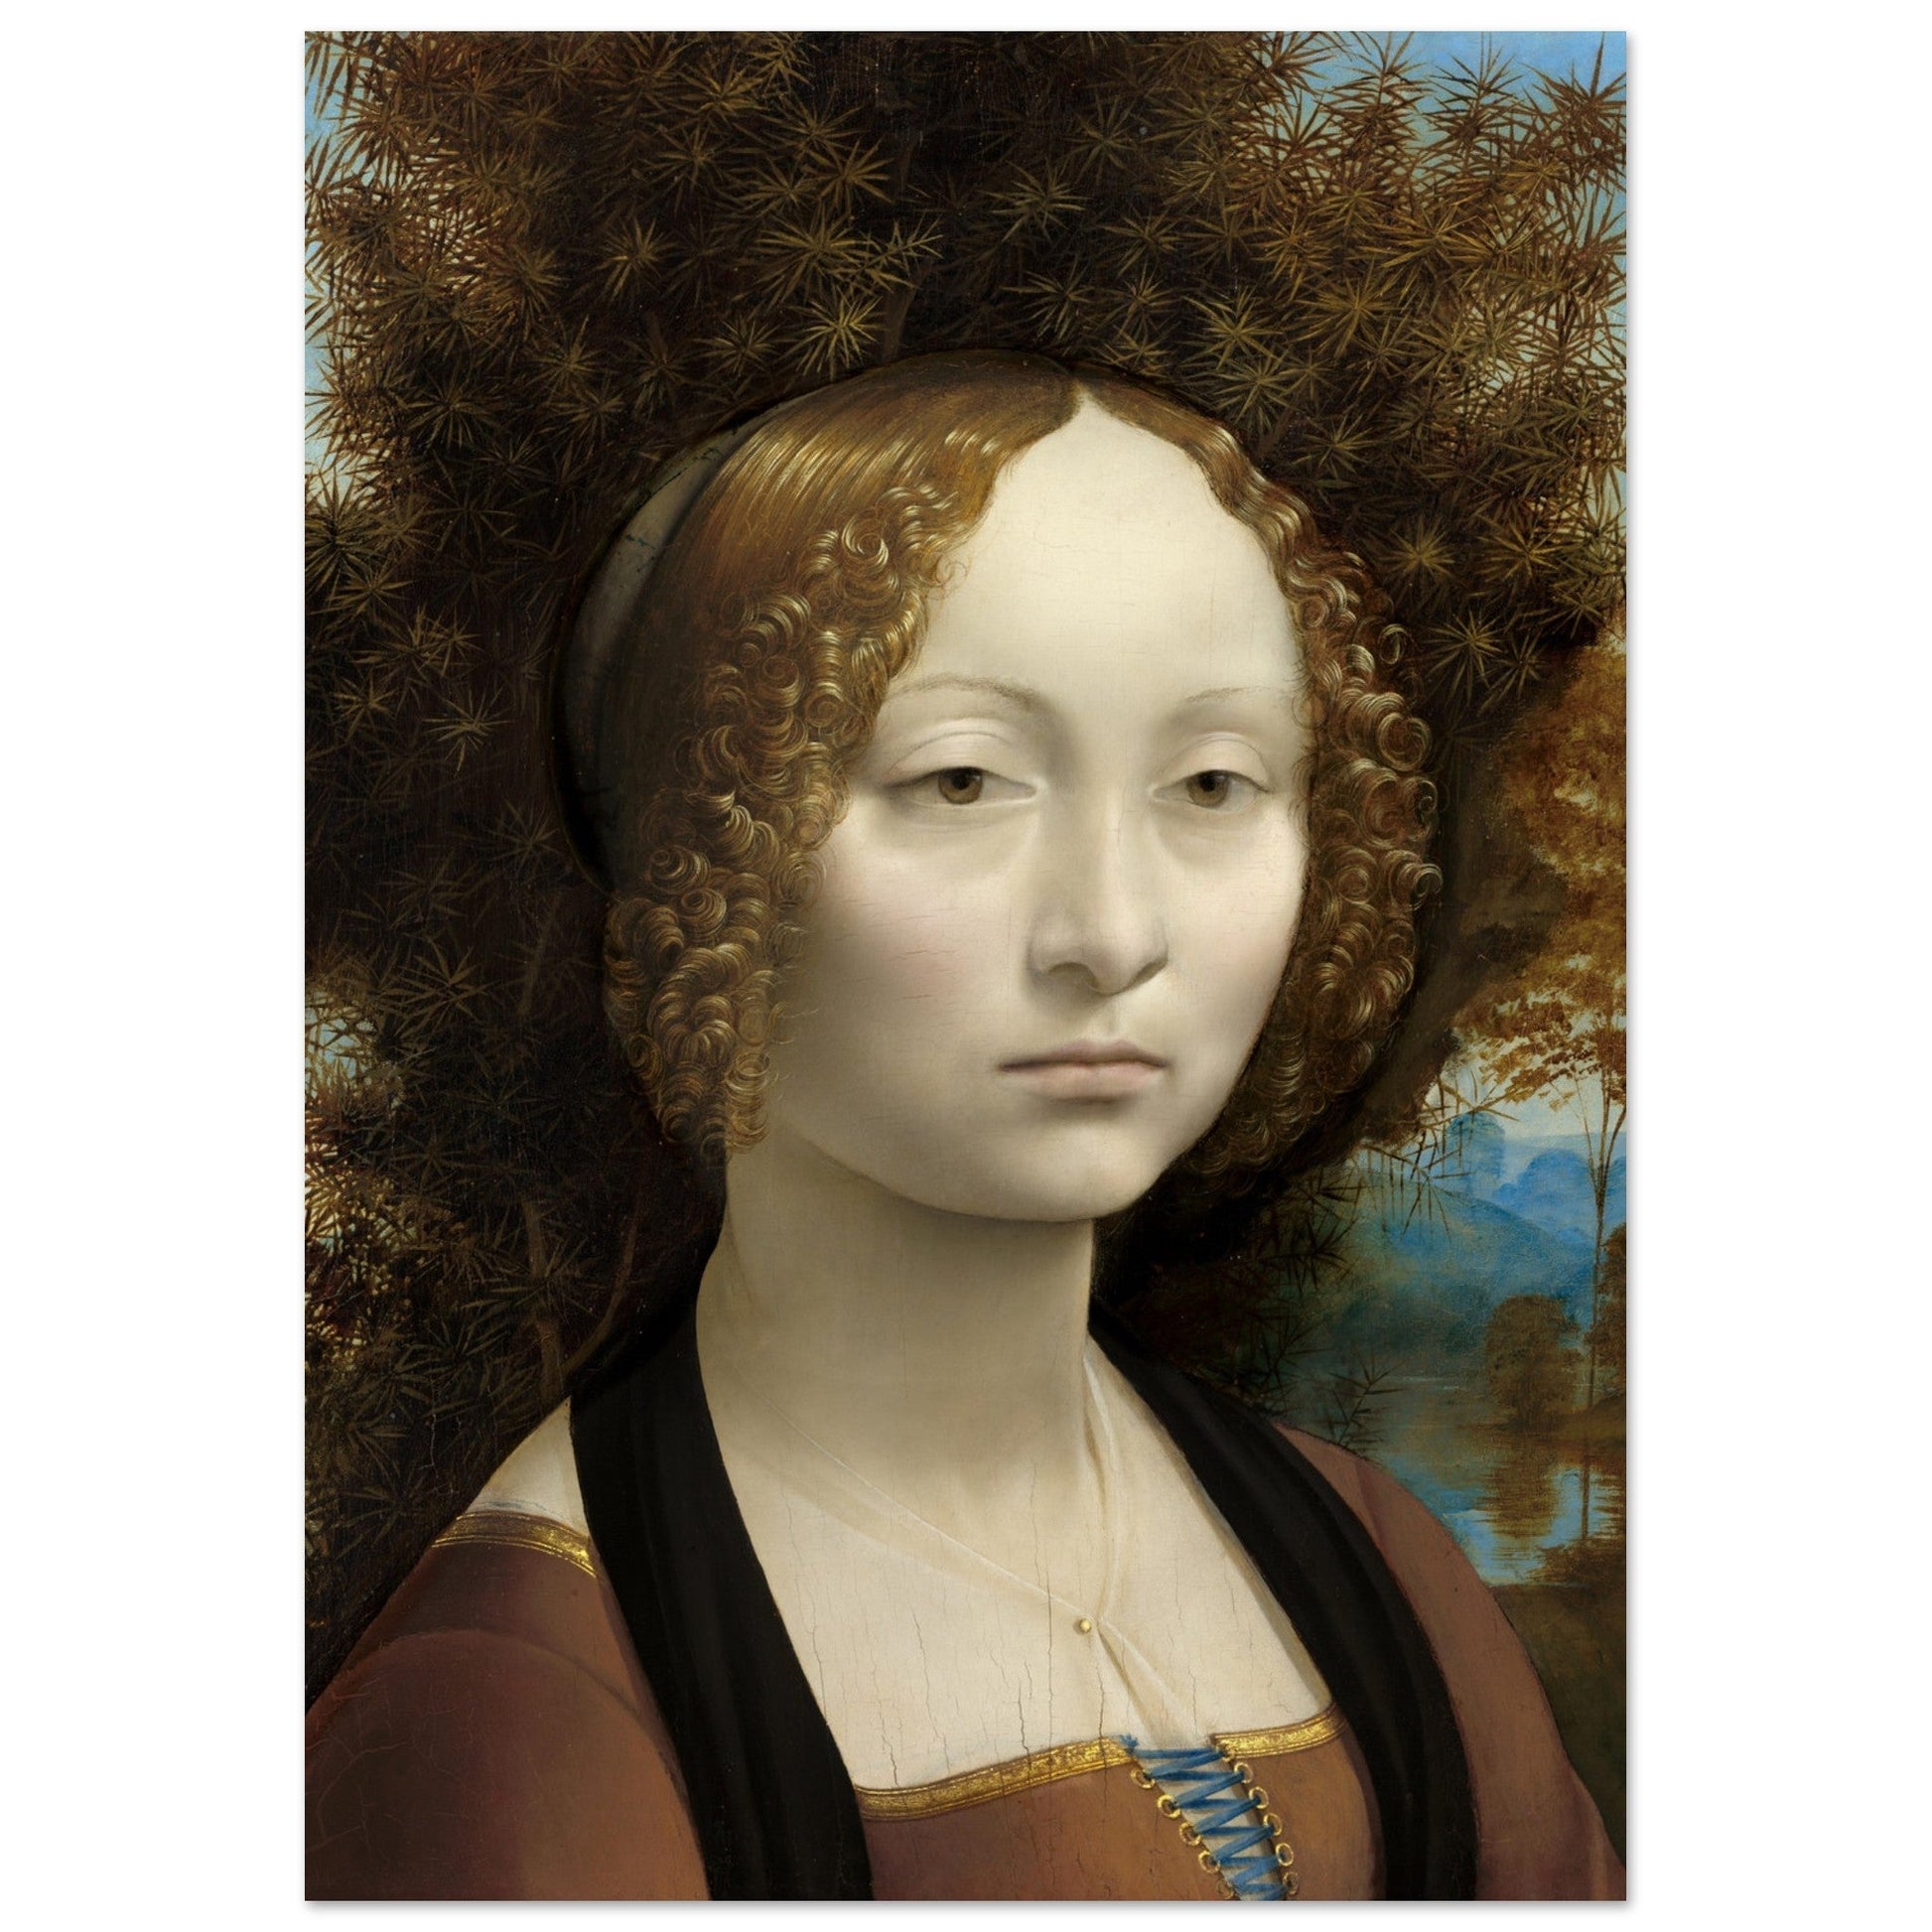 A beautifully colored wall art depicting Ginevra de' Benci, perfect as a poster for room decor.